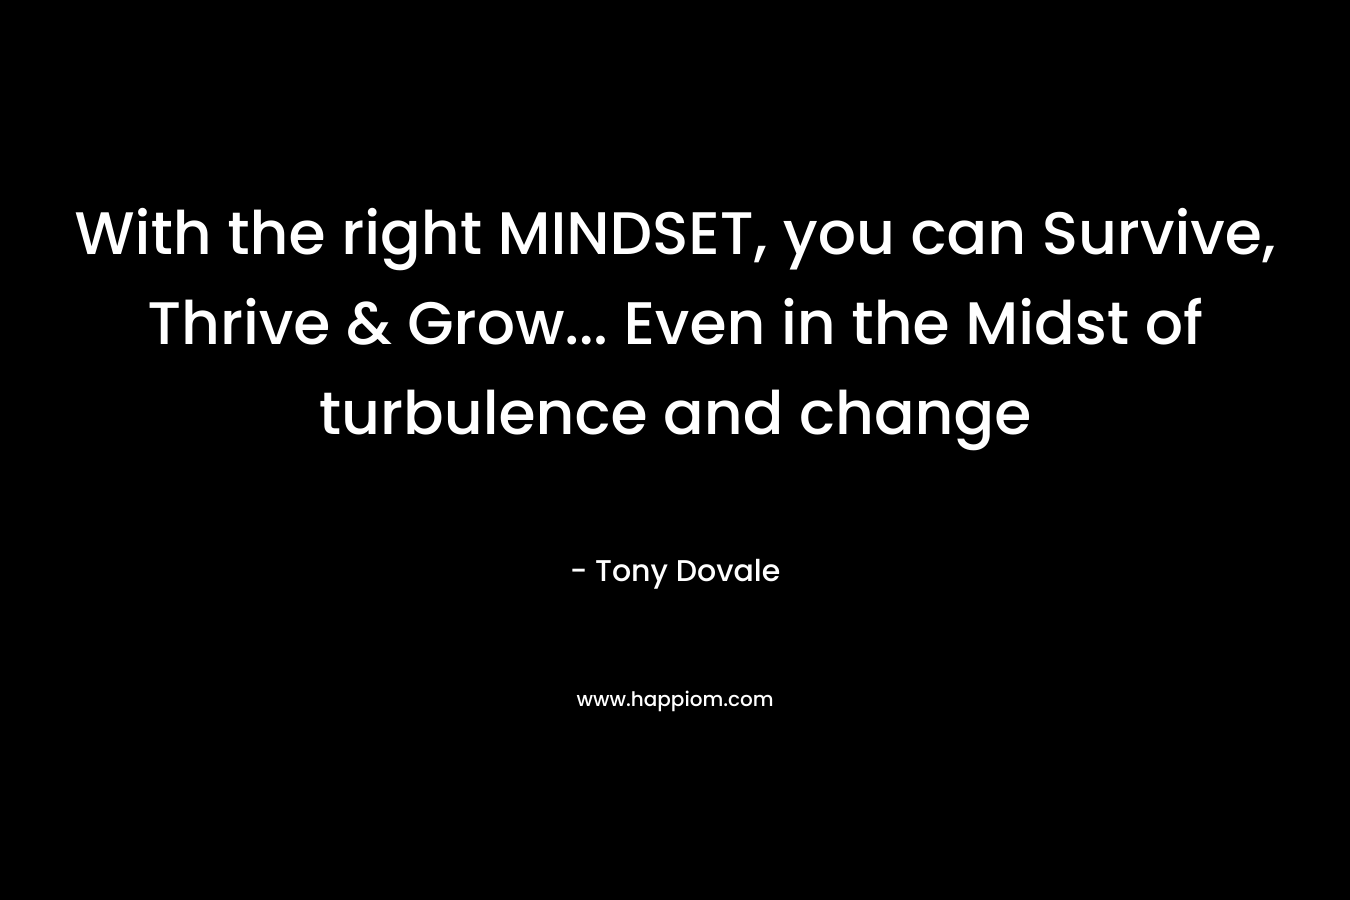 With the right MINDSET, you can Survive, Thrive & Grow... Even in the Midst of turbulence and change